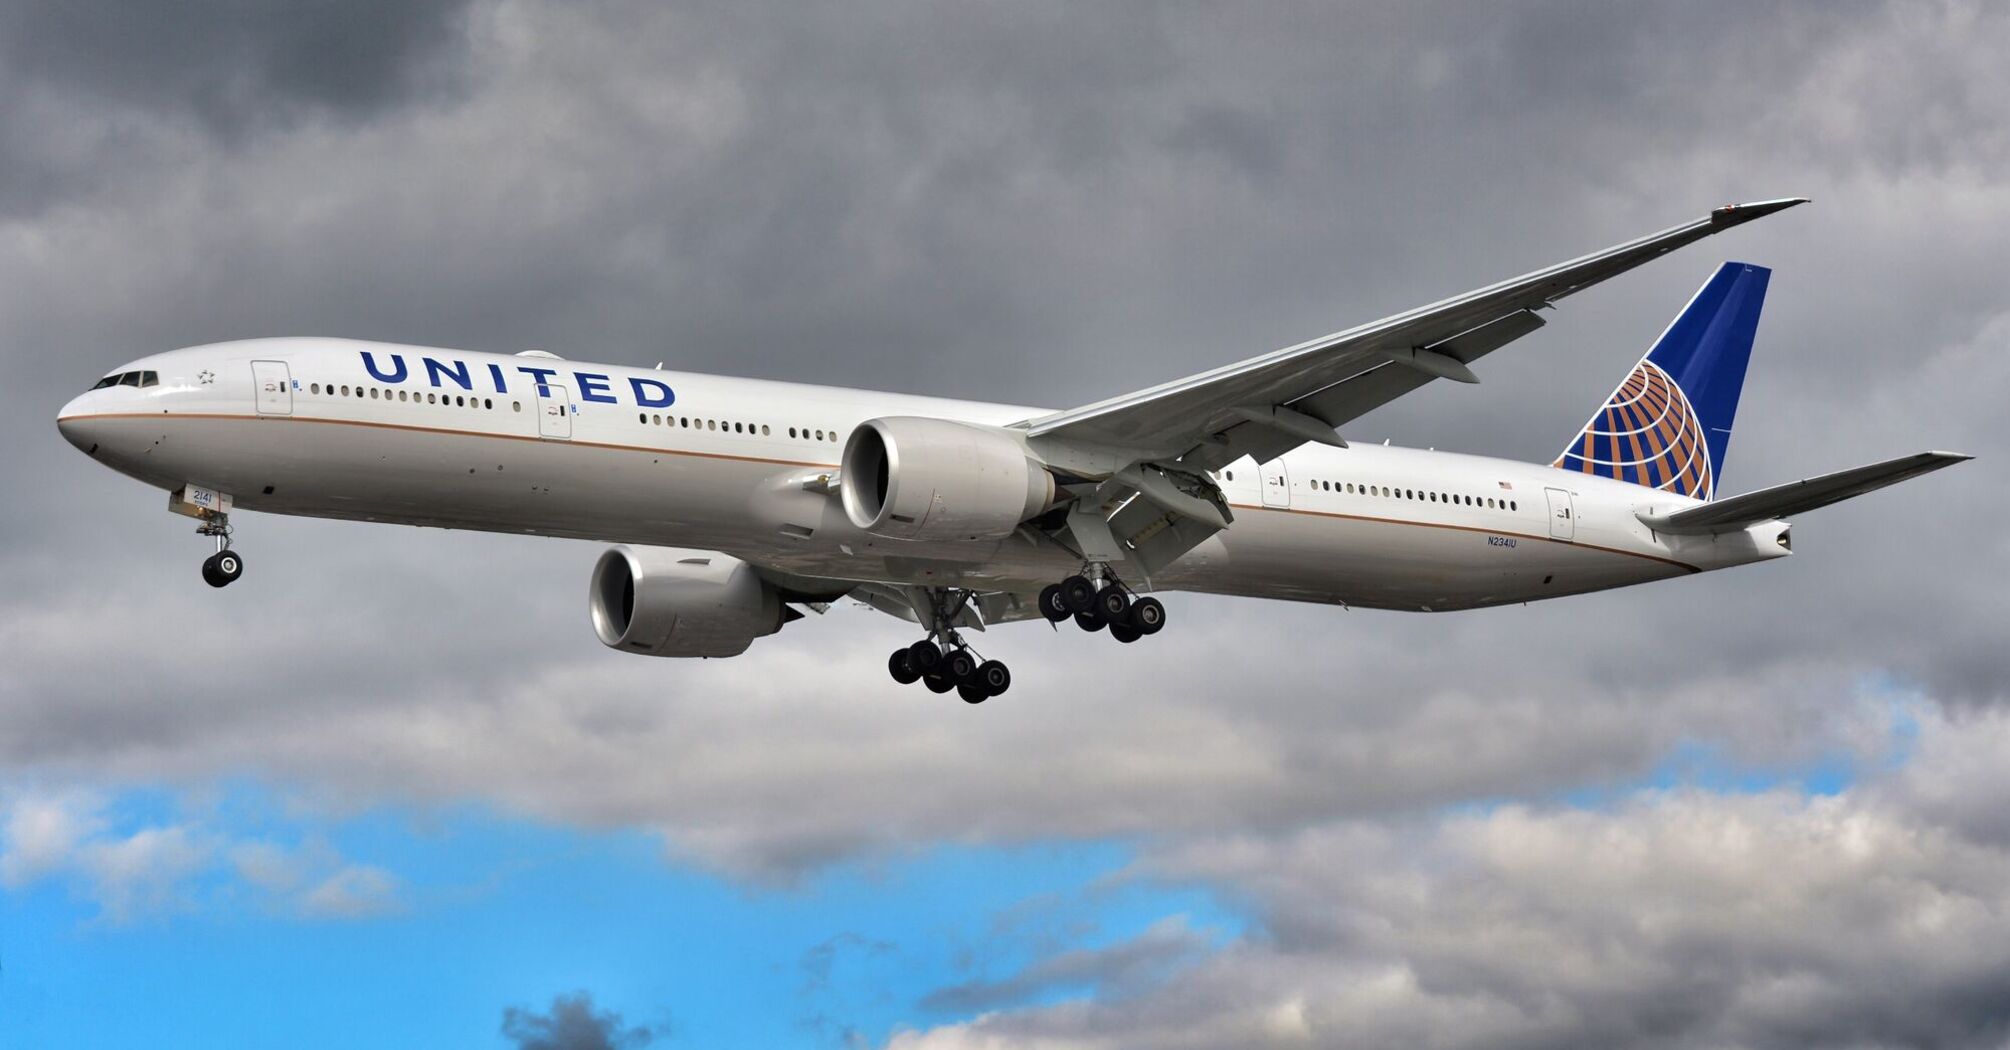 Seats for the company: United Airlines offers a new booking feature